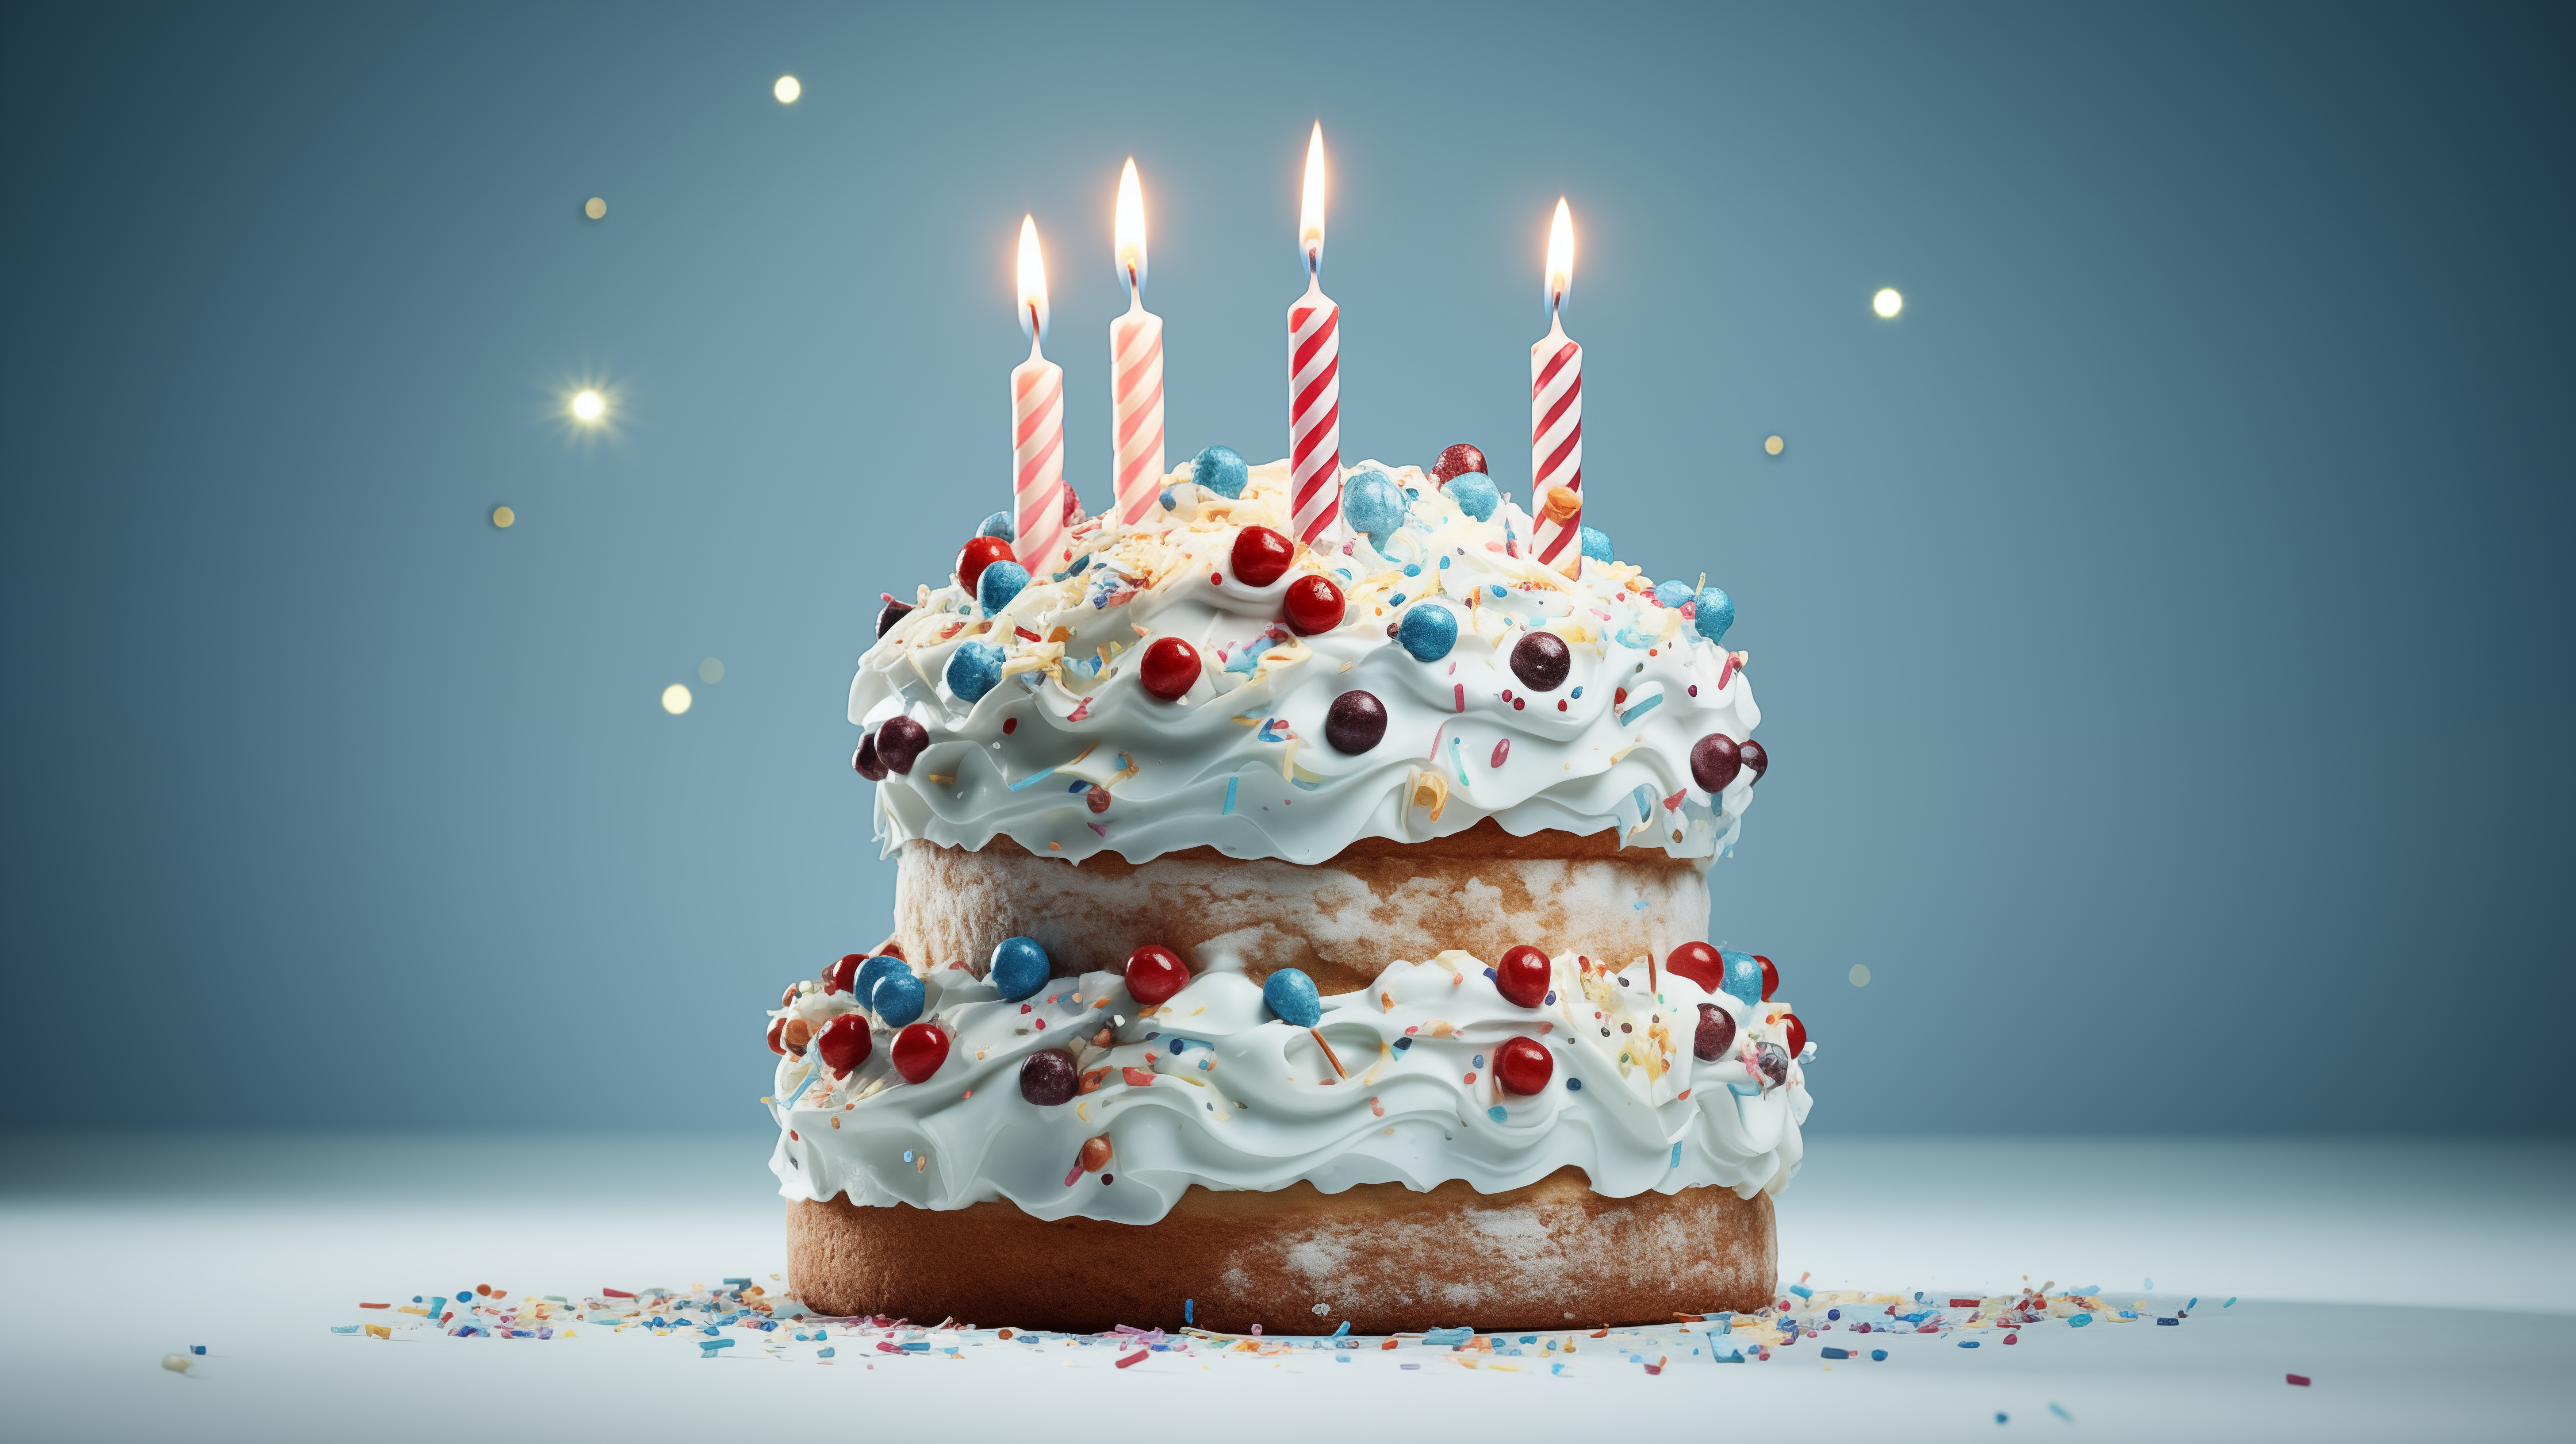 HD desktop wallpaper of a scrumptious birthday cake with lit candles, creamy frosting, and colorful sprinkles, perfect for a celebratory background.